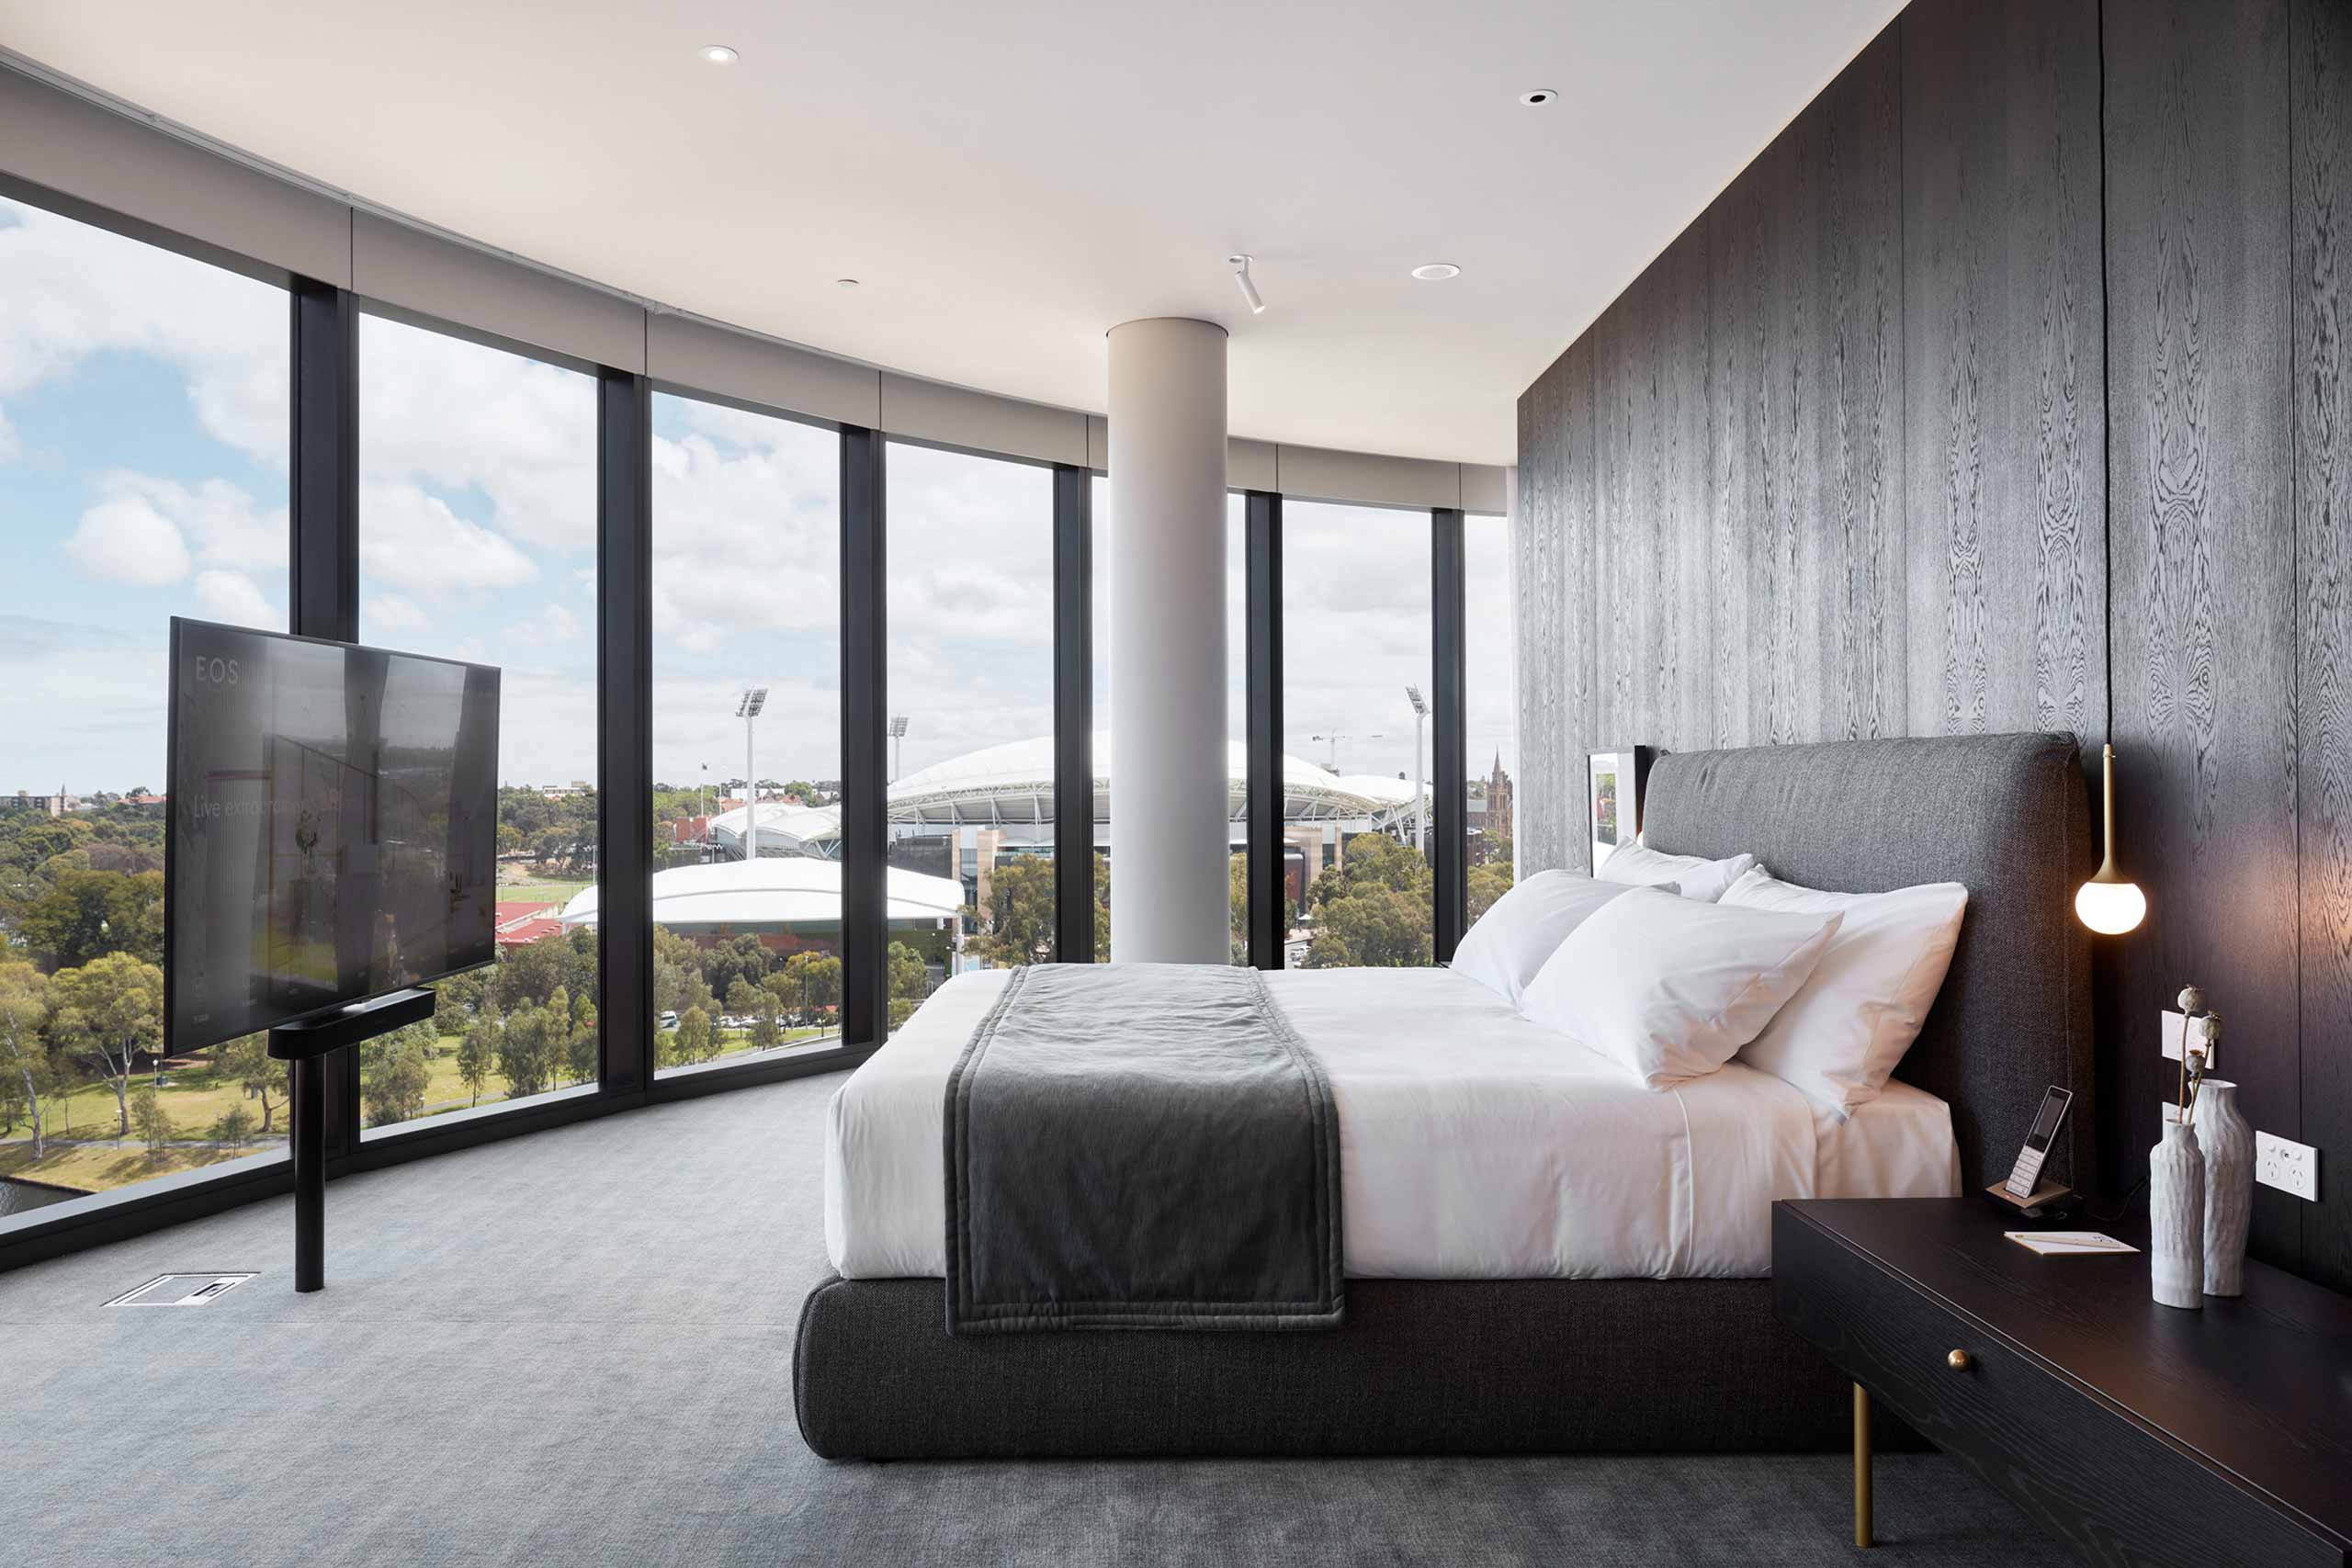 A sophisticated bedroom at EOS by Skycity, Adelaide, South Australia